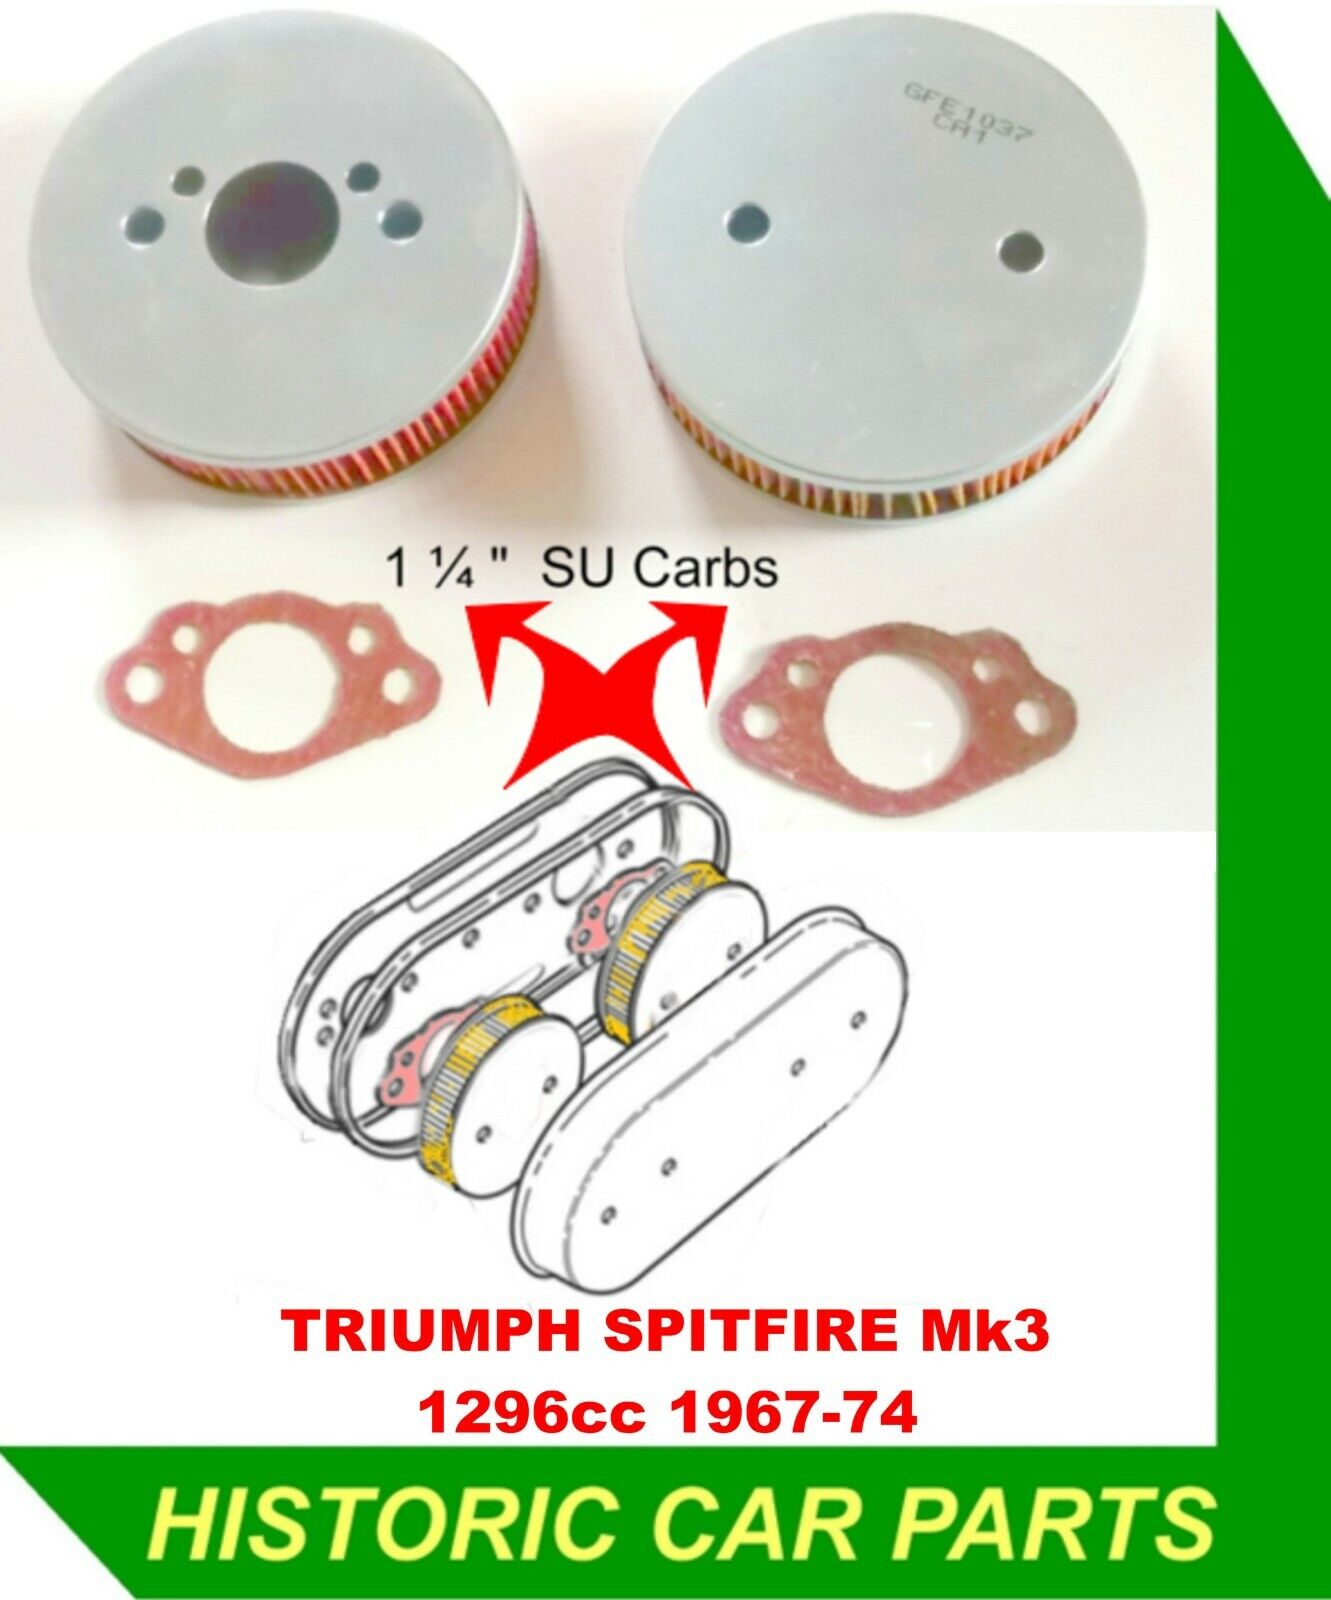 2 x 1¼” SU Carb AIR FILTERS & GASKETS for Triumph Spitfire 1300 Mk 3 1967-74